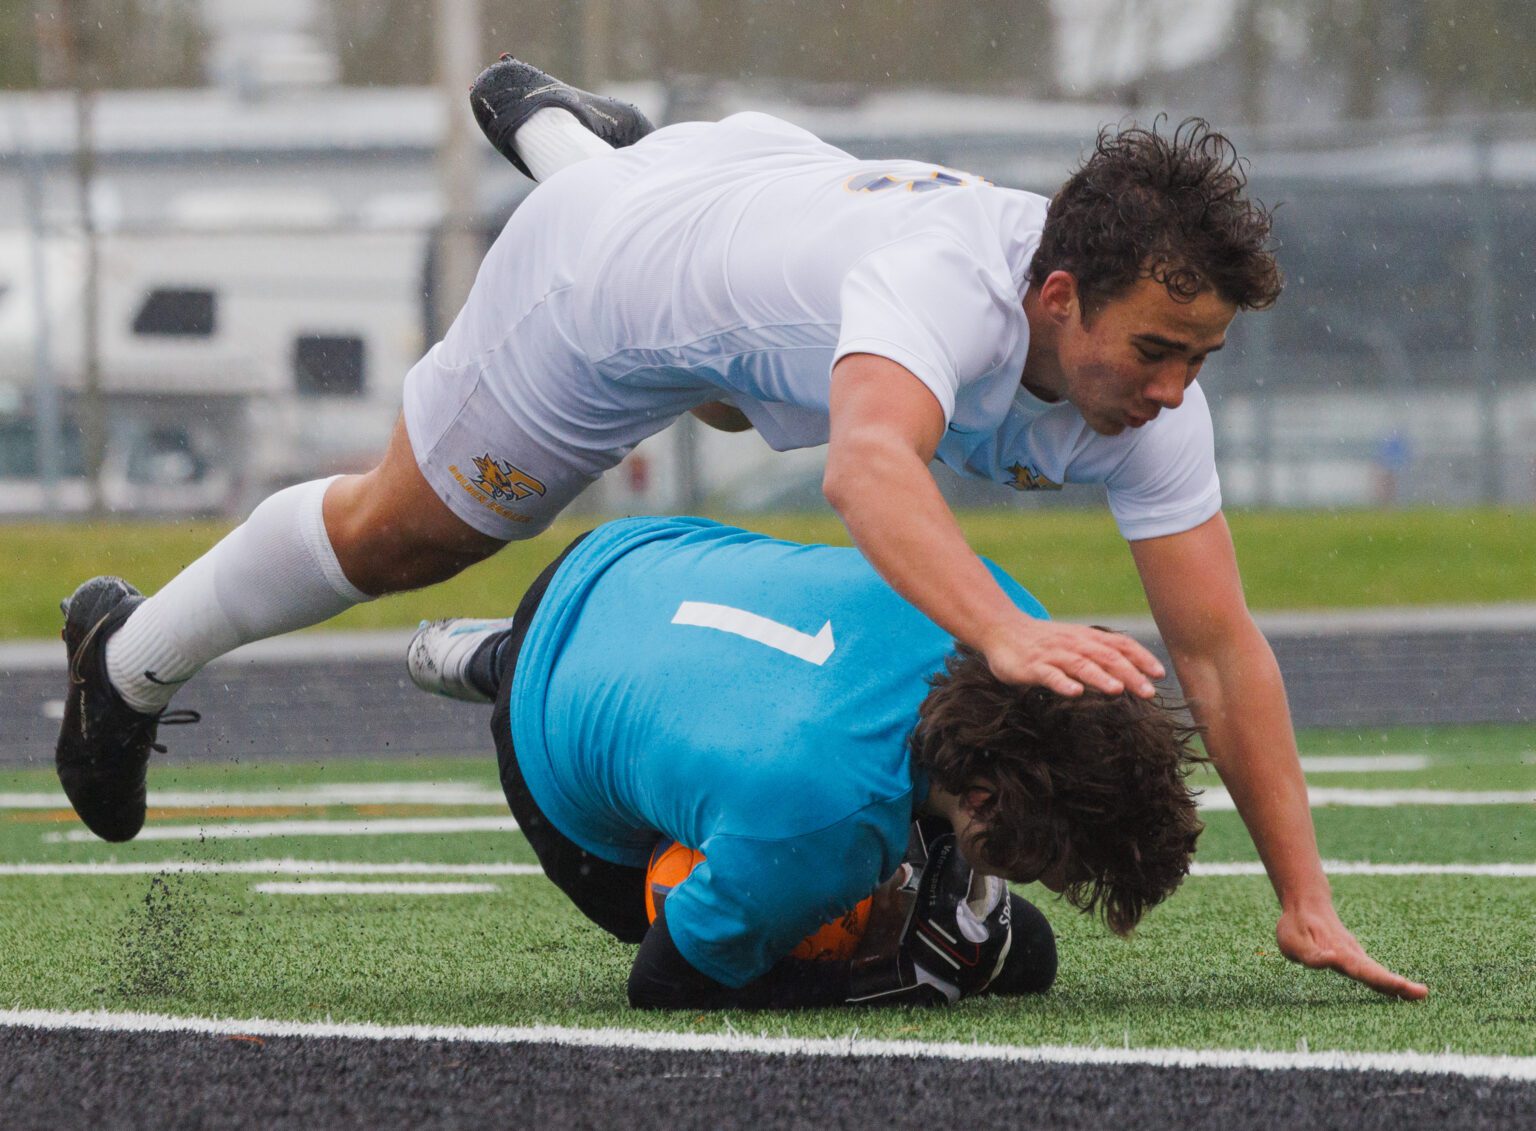 Ferndale’s Ruslan Yelfimov dives over Blaine goalkeeper Kael Evinger April 15 after a shot on goal in the second half in Blaine. The Golden Eagles and Borderites battled to a 0-0 tie.